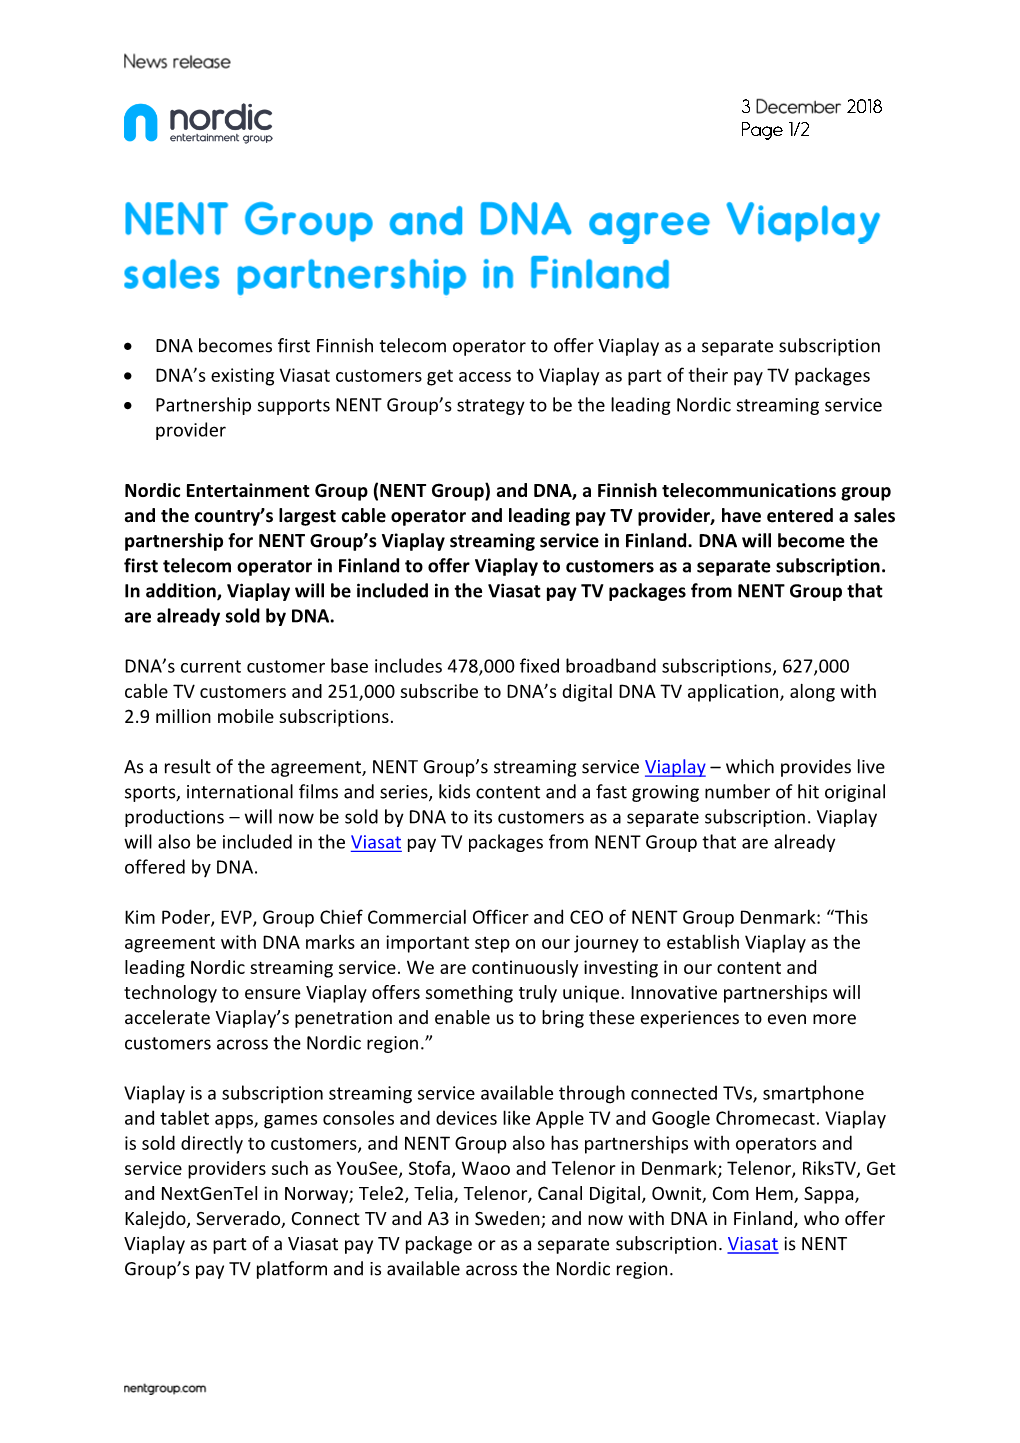 • DNA Becomes First Finnish Telecom Operator to Offer Viaplay As A